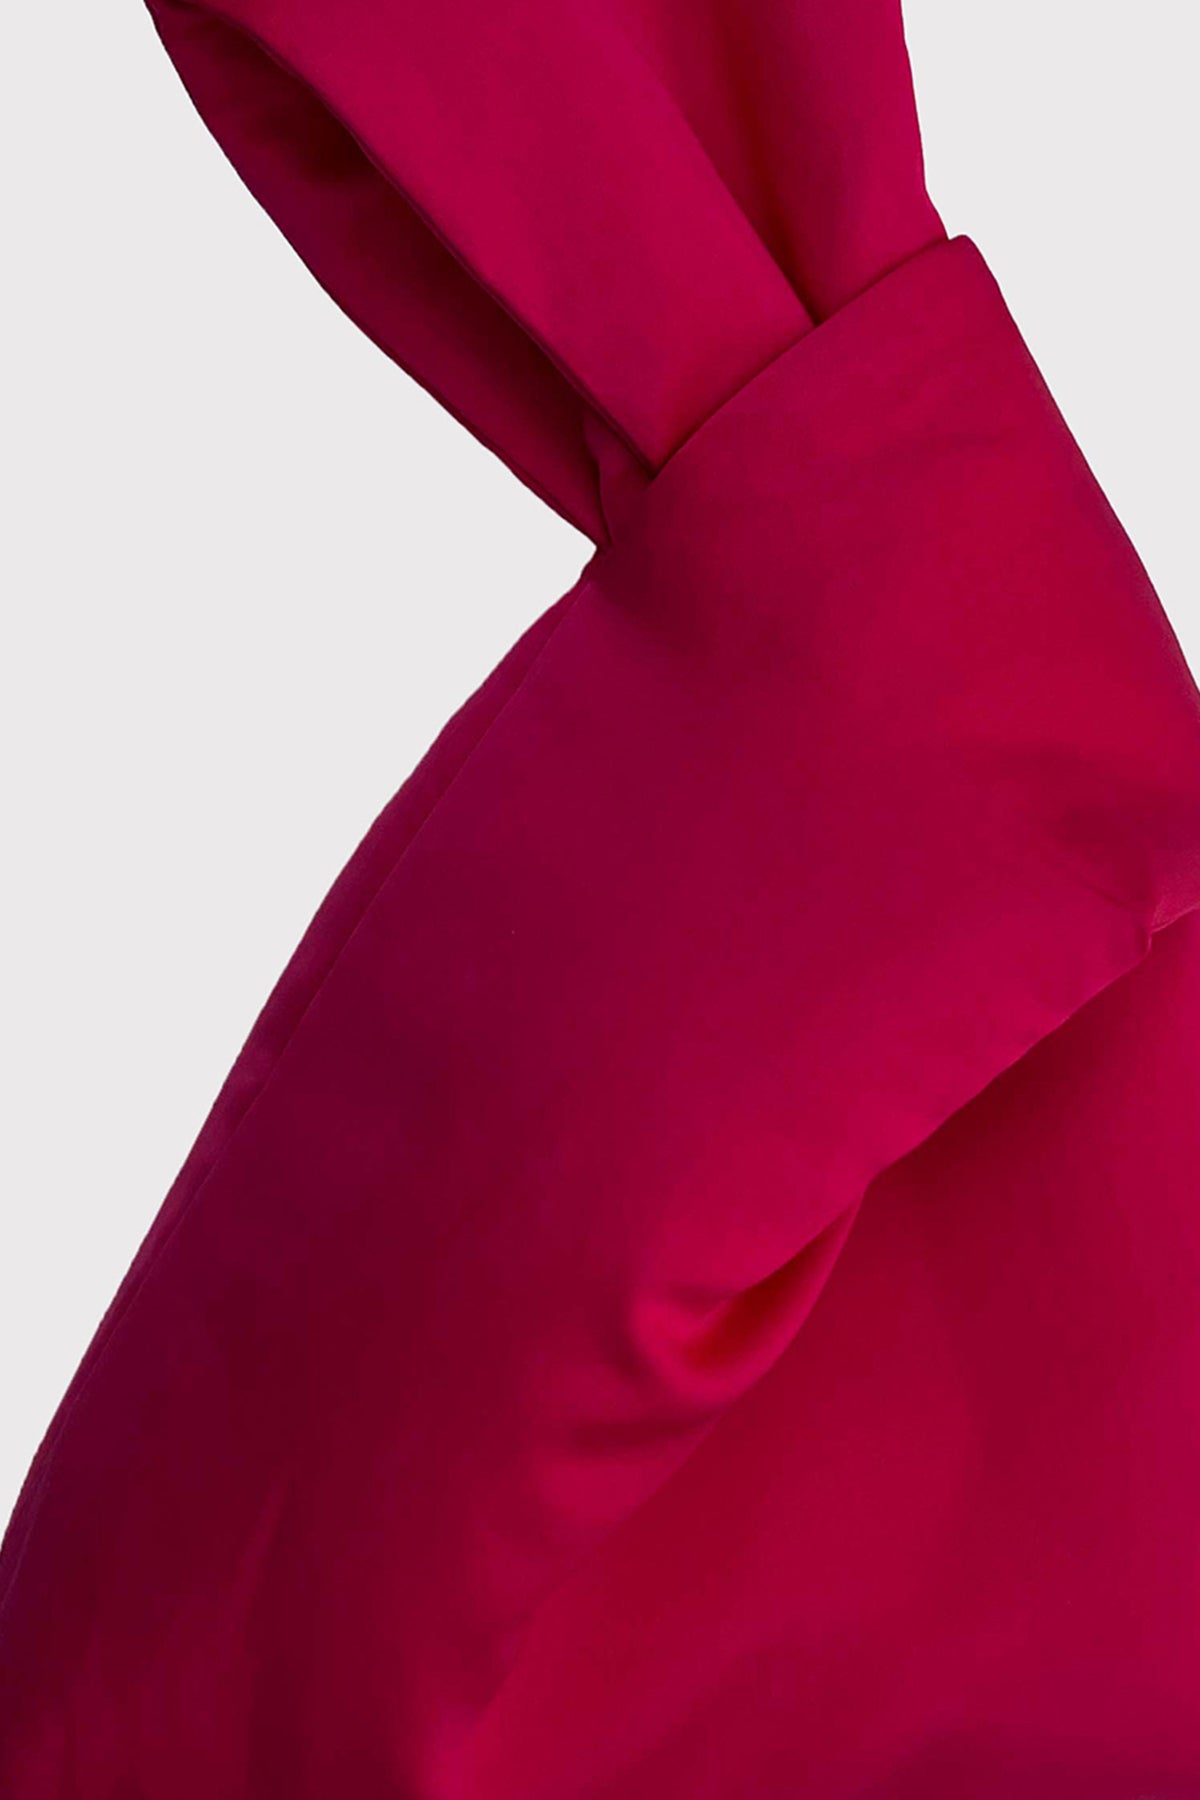 A close up of a Velvet by Jenny Graham fuchsia colored scarf.-25484922290369